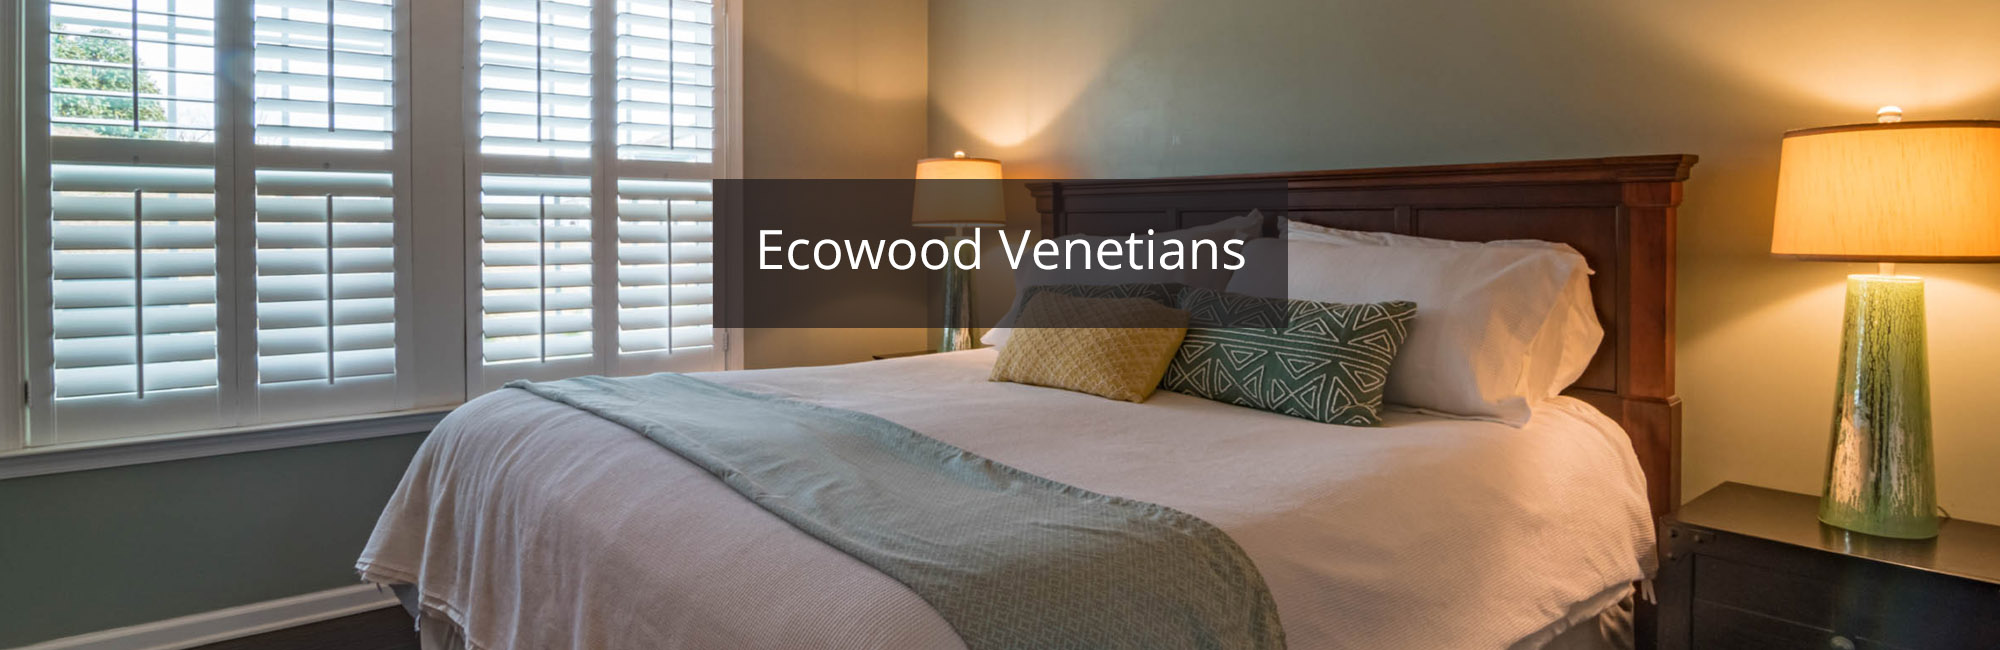 Ecowood Venetians by Curtain Trend Gold Coast and Brisbane - home New